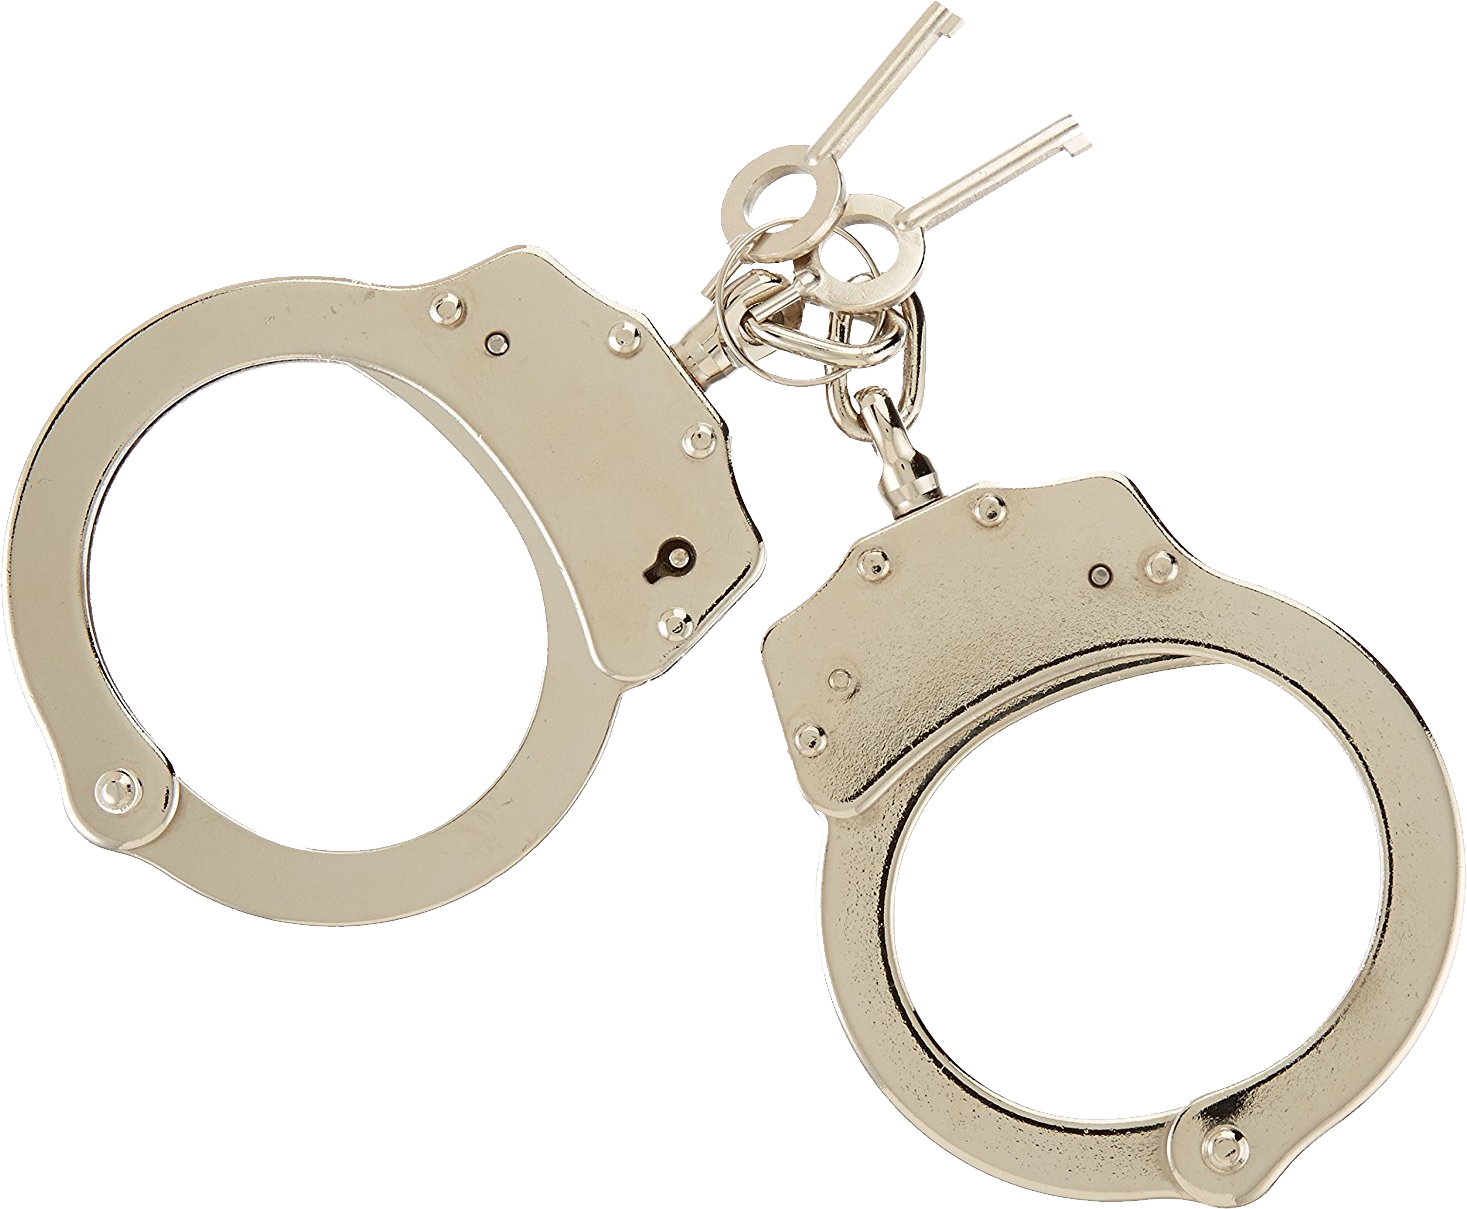 Handcuffs clipart icon. Png web icons 